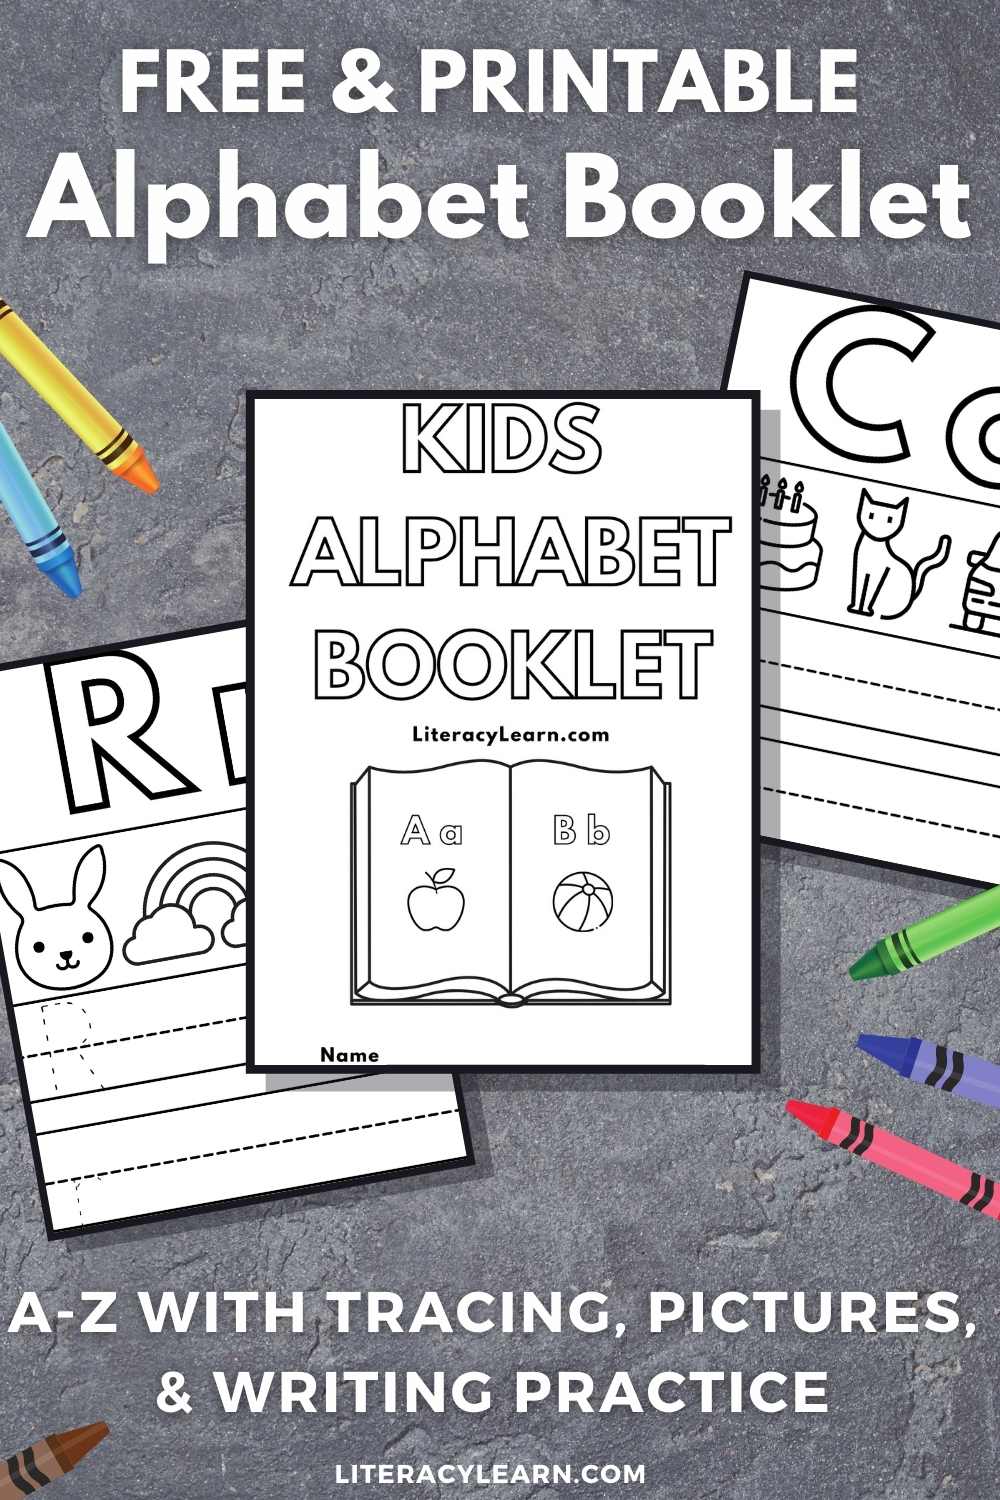 Children Writing Book 3 Years Old Kids Writing Practice Tracing Alphabets  Letters Writing Books for Kids Digital Activity Workbook 